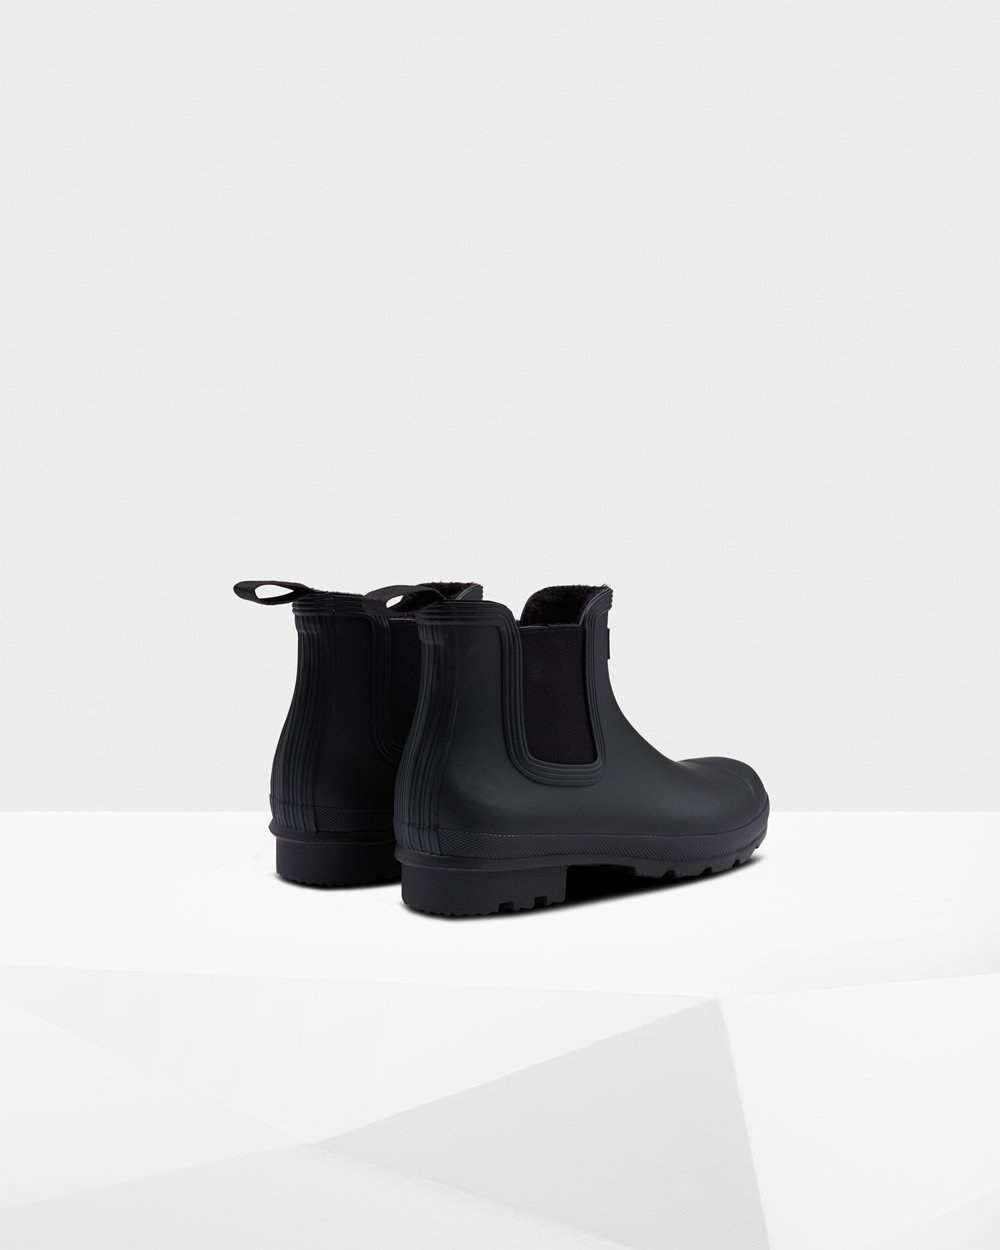 Mens Chelsea Boots - Hunter Original Insulated (03MUHNLWS) - Black